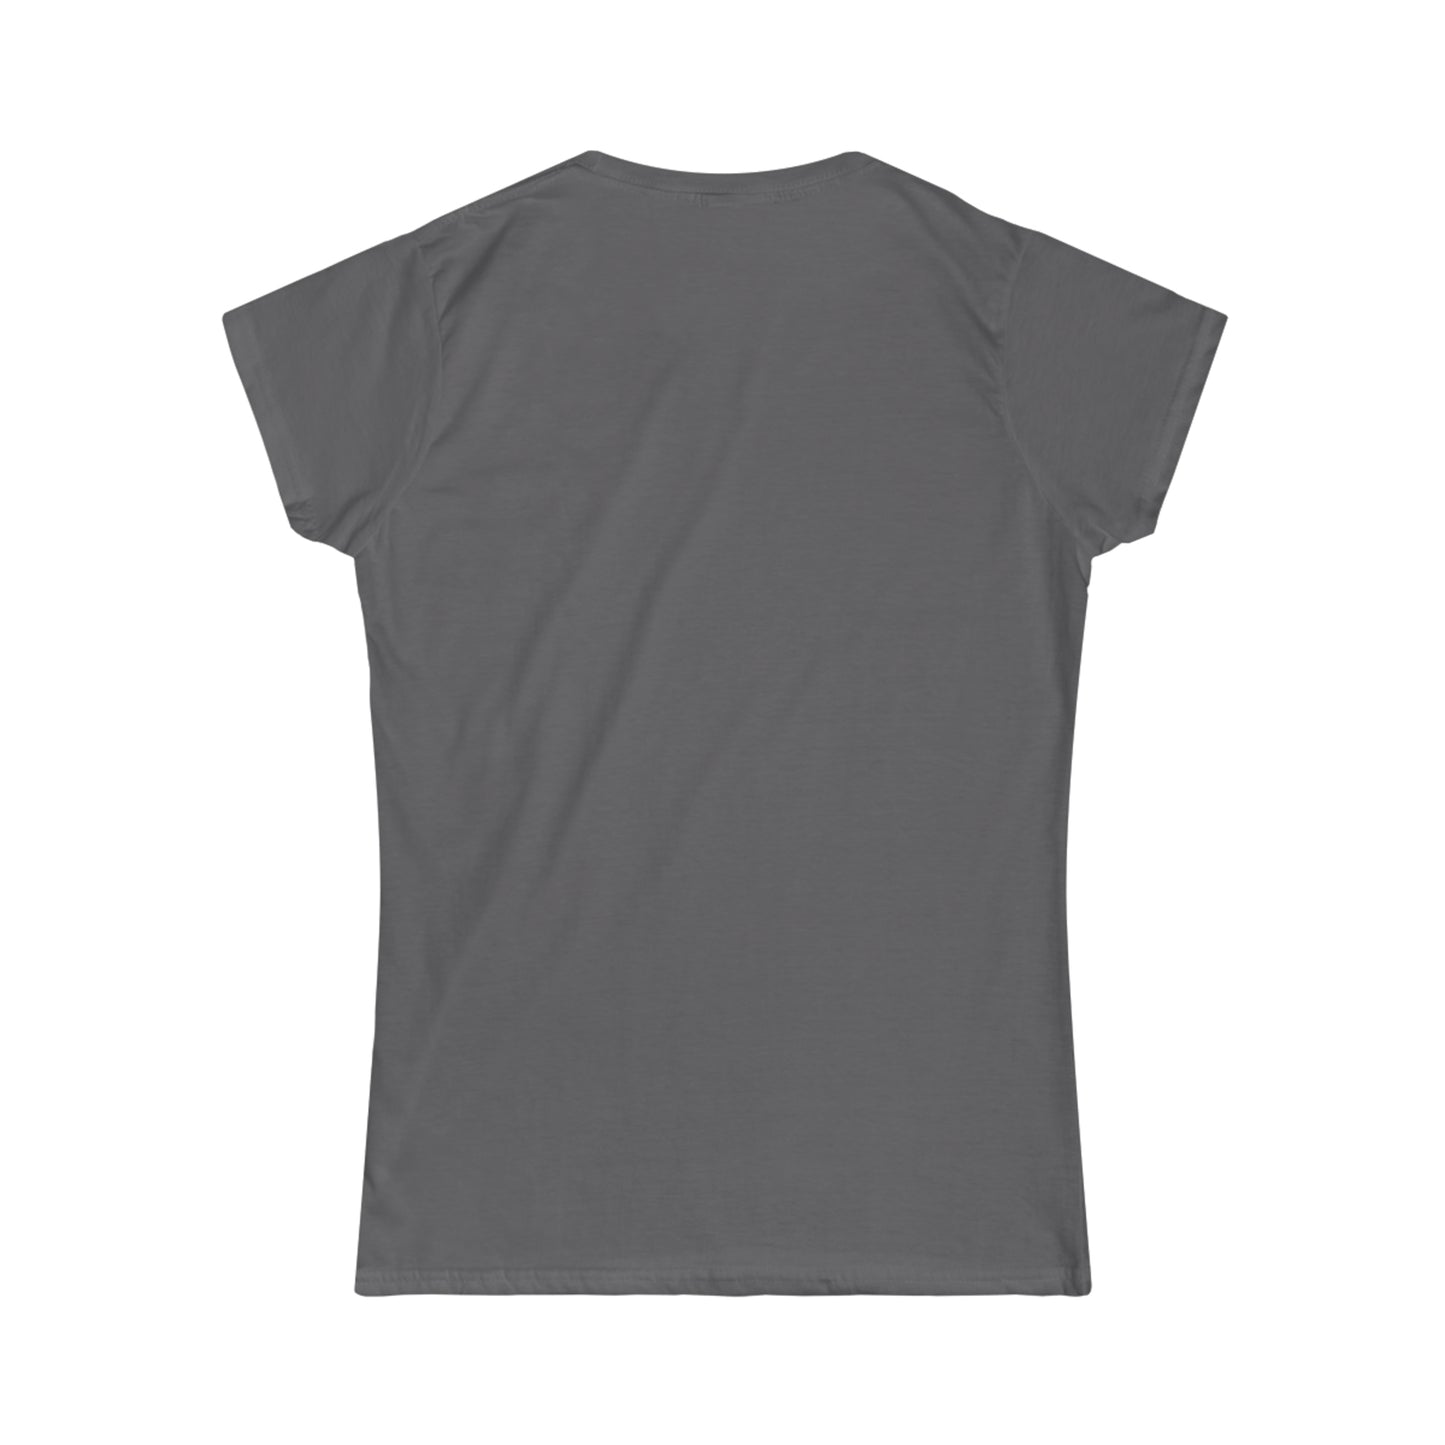 For The (Loud) City Quitter - Women's Graphic Tee